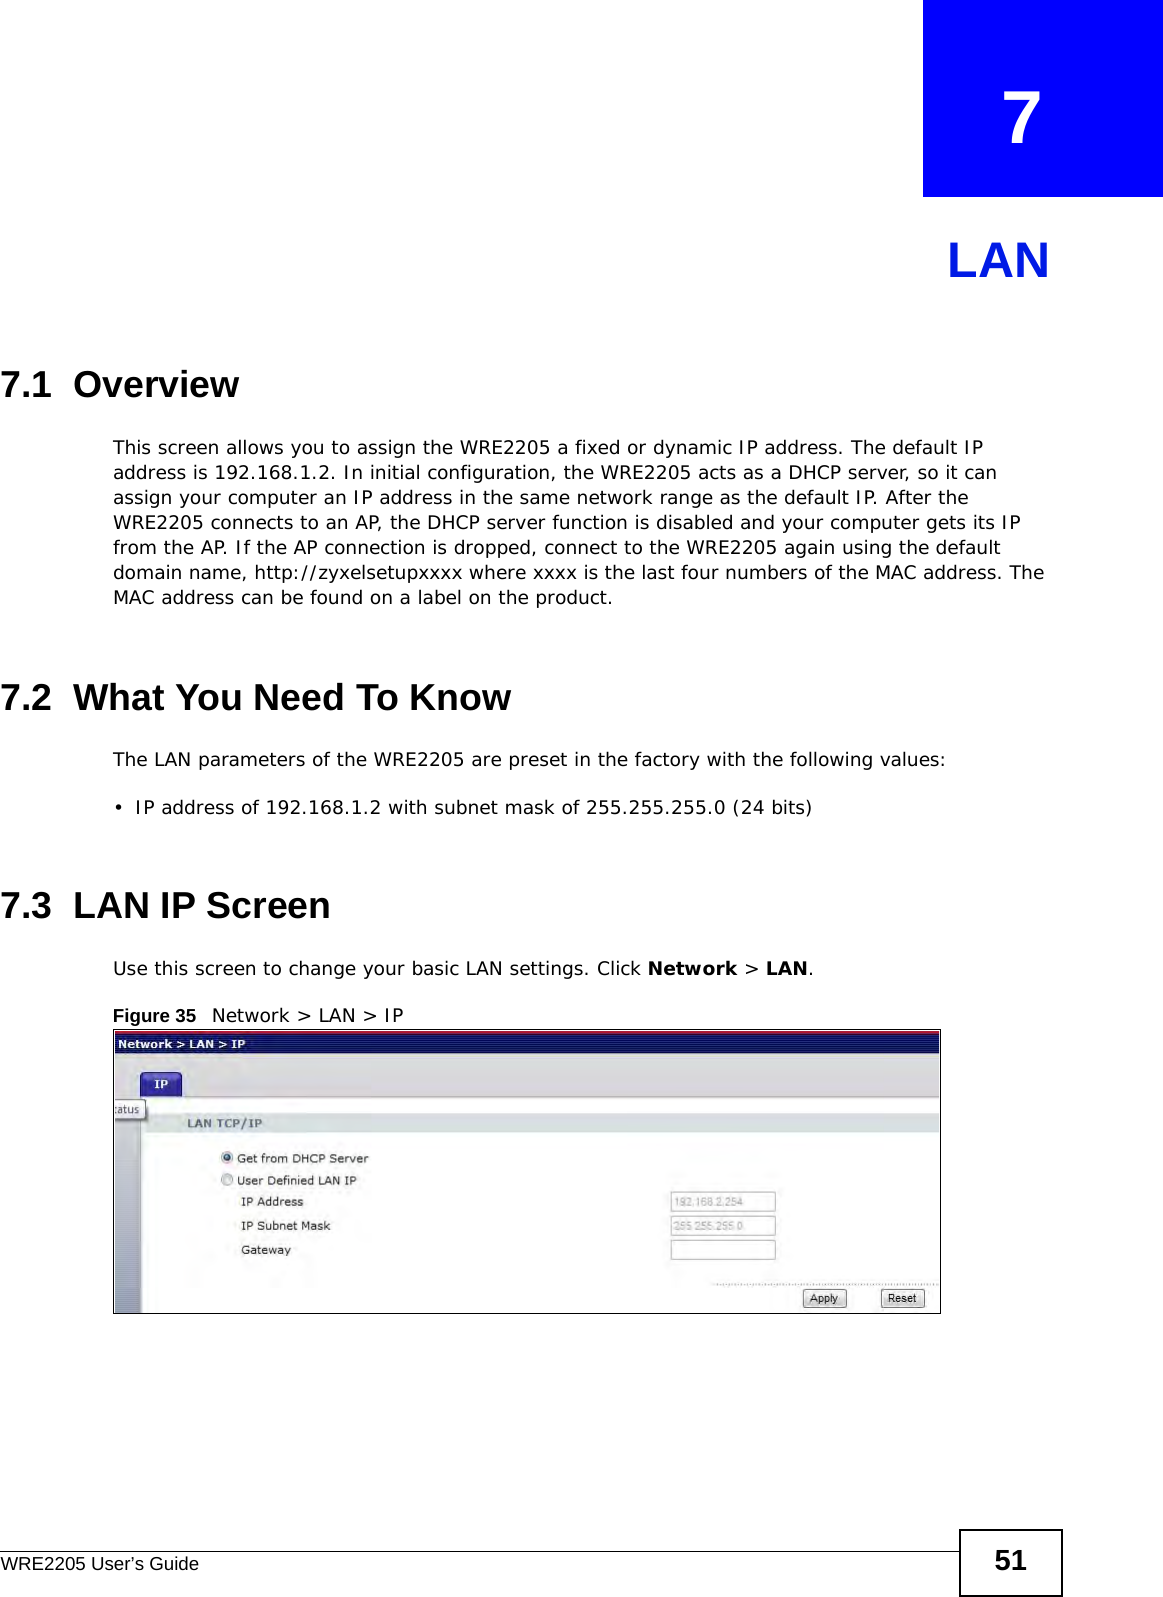 WRE2205 User’s Guide 51CHAPTER   7LAN7.1  OverviewThis screen allows you to assign the WRE2205 a fixed or dynamic IP address. The default IP address is 192.168.1.2. In initial configuration, the WRE2205 acts as a DHCP server, so it can assign your computer an IP address in the same network range as the default IP. After the WRE2205 connects to an AP, the DHCP server function is disabled and your computer gets its IP from the AP. If the AP connection is dropped, connect to the WRE2205 again using the default domain name, http://zyxelsetupxxxx where xxxx is the last four numbers of the MAC address. The MAC address can be found on a label on the product.7.2  What You Need To KnowThe LAN parameters of the WRE2205 are preset in the factory with the following values:• IP address of 192.168.1.2 with subnet mask of 255.255.255.0 (24 bits)7.3  LAN IP ScreenUse this screen to change your basic LAN settings. Click Network &gt; LAN.Figure 35   Network &gt; LAN &gt; IP 